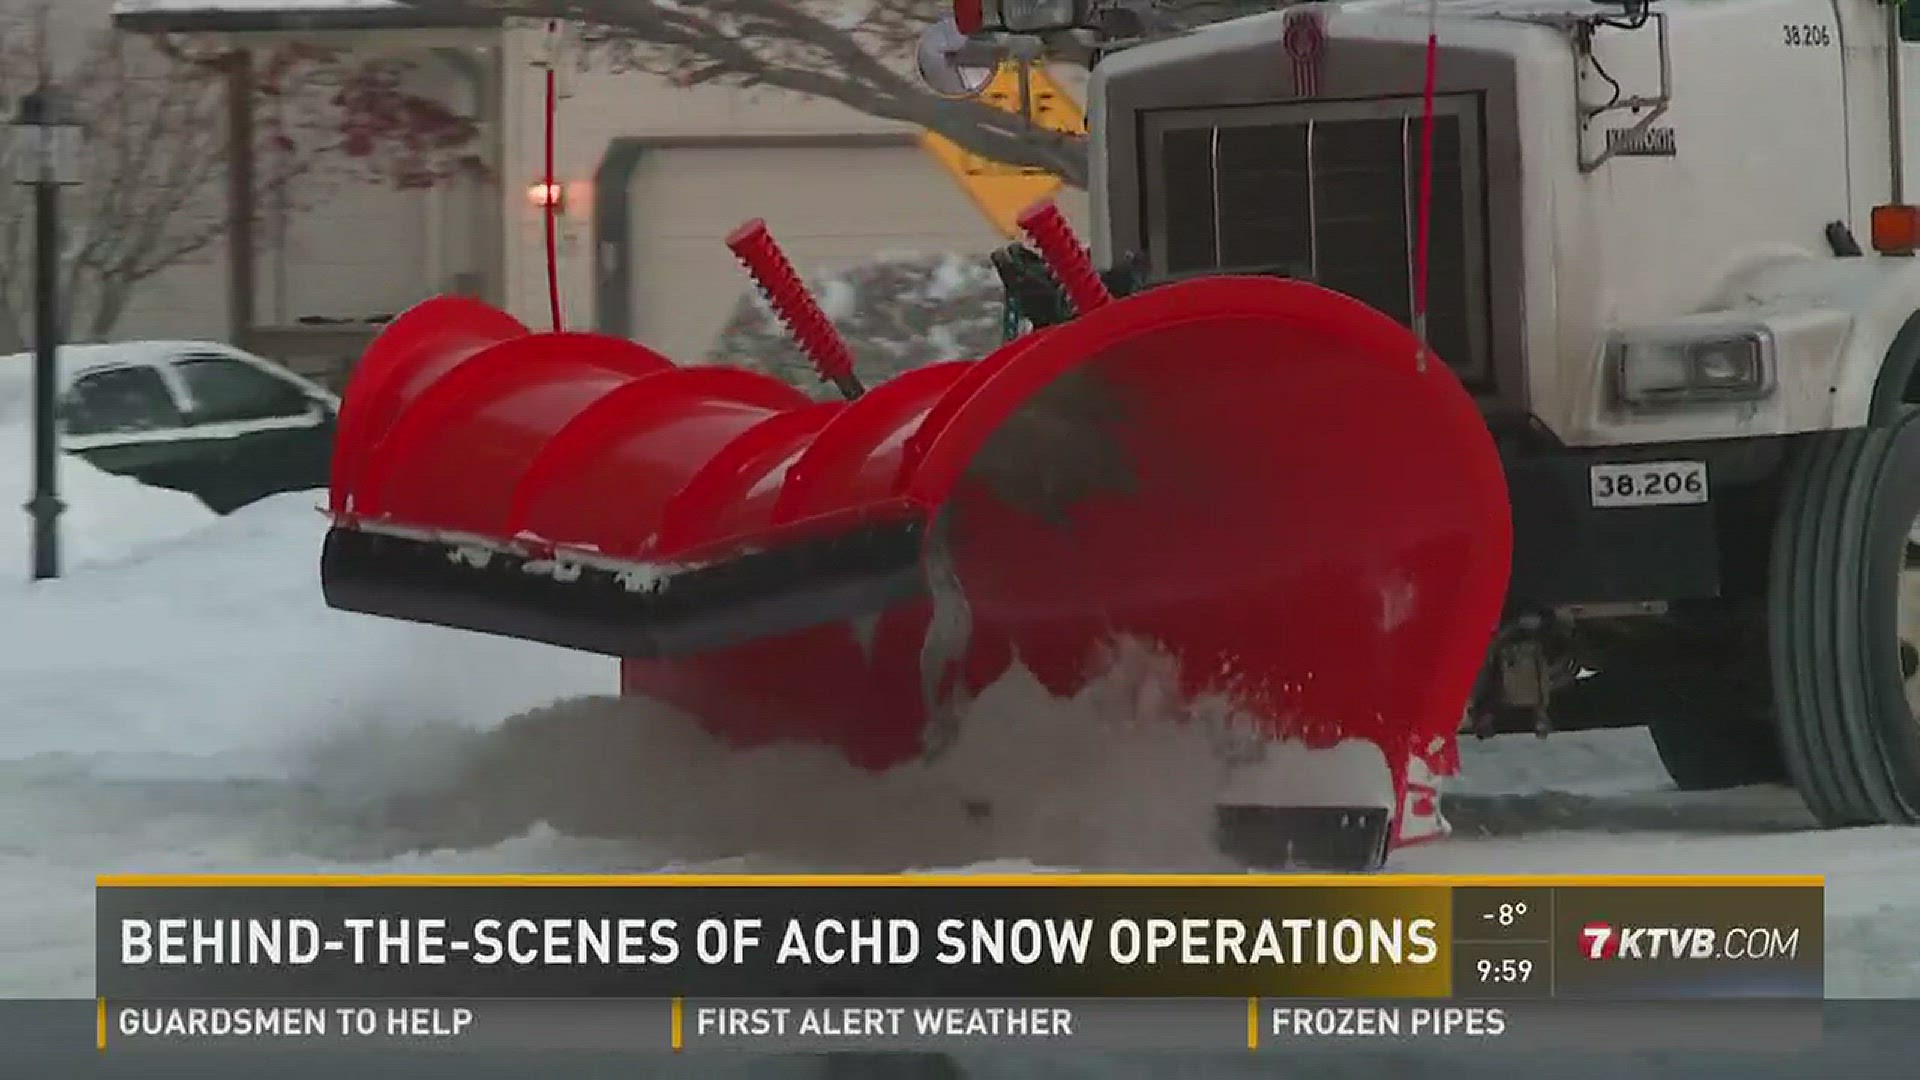 Behind the scenes of ACHD snow operations.